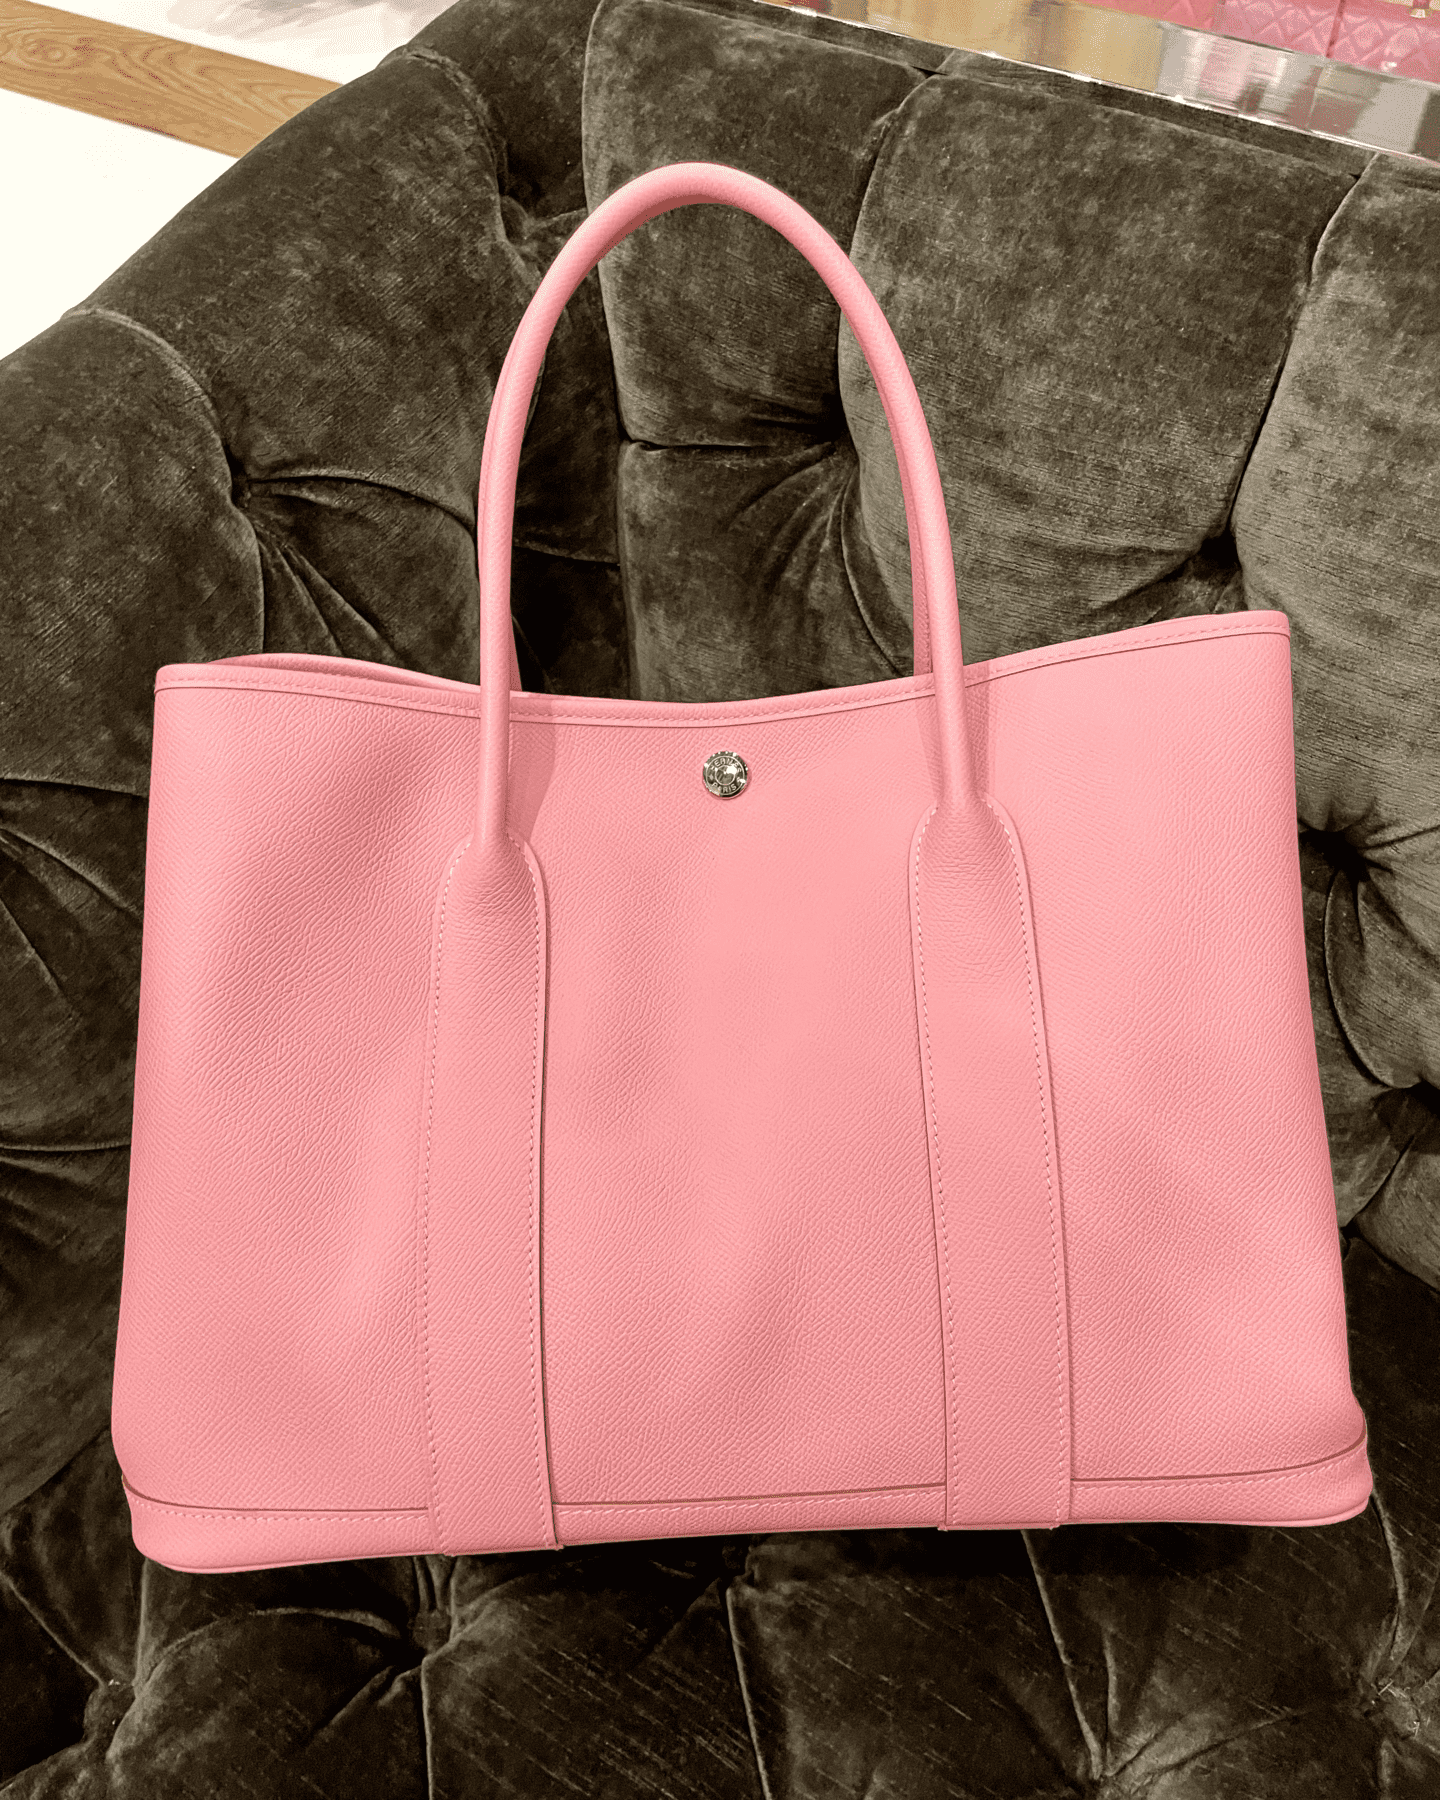 Hermes Pink Garden Party Bag Review